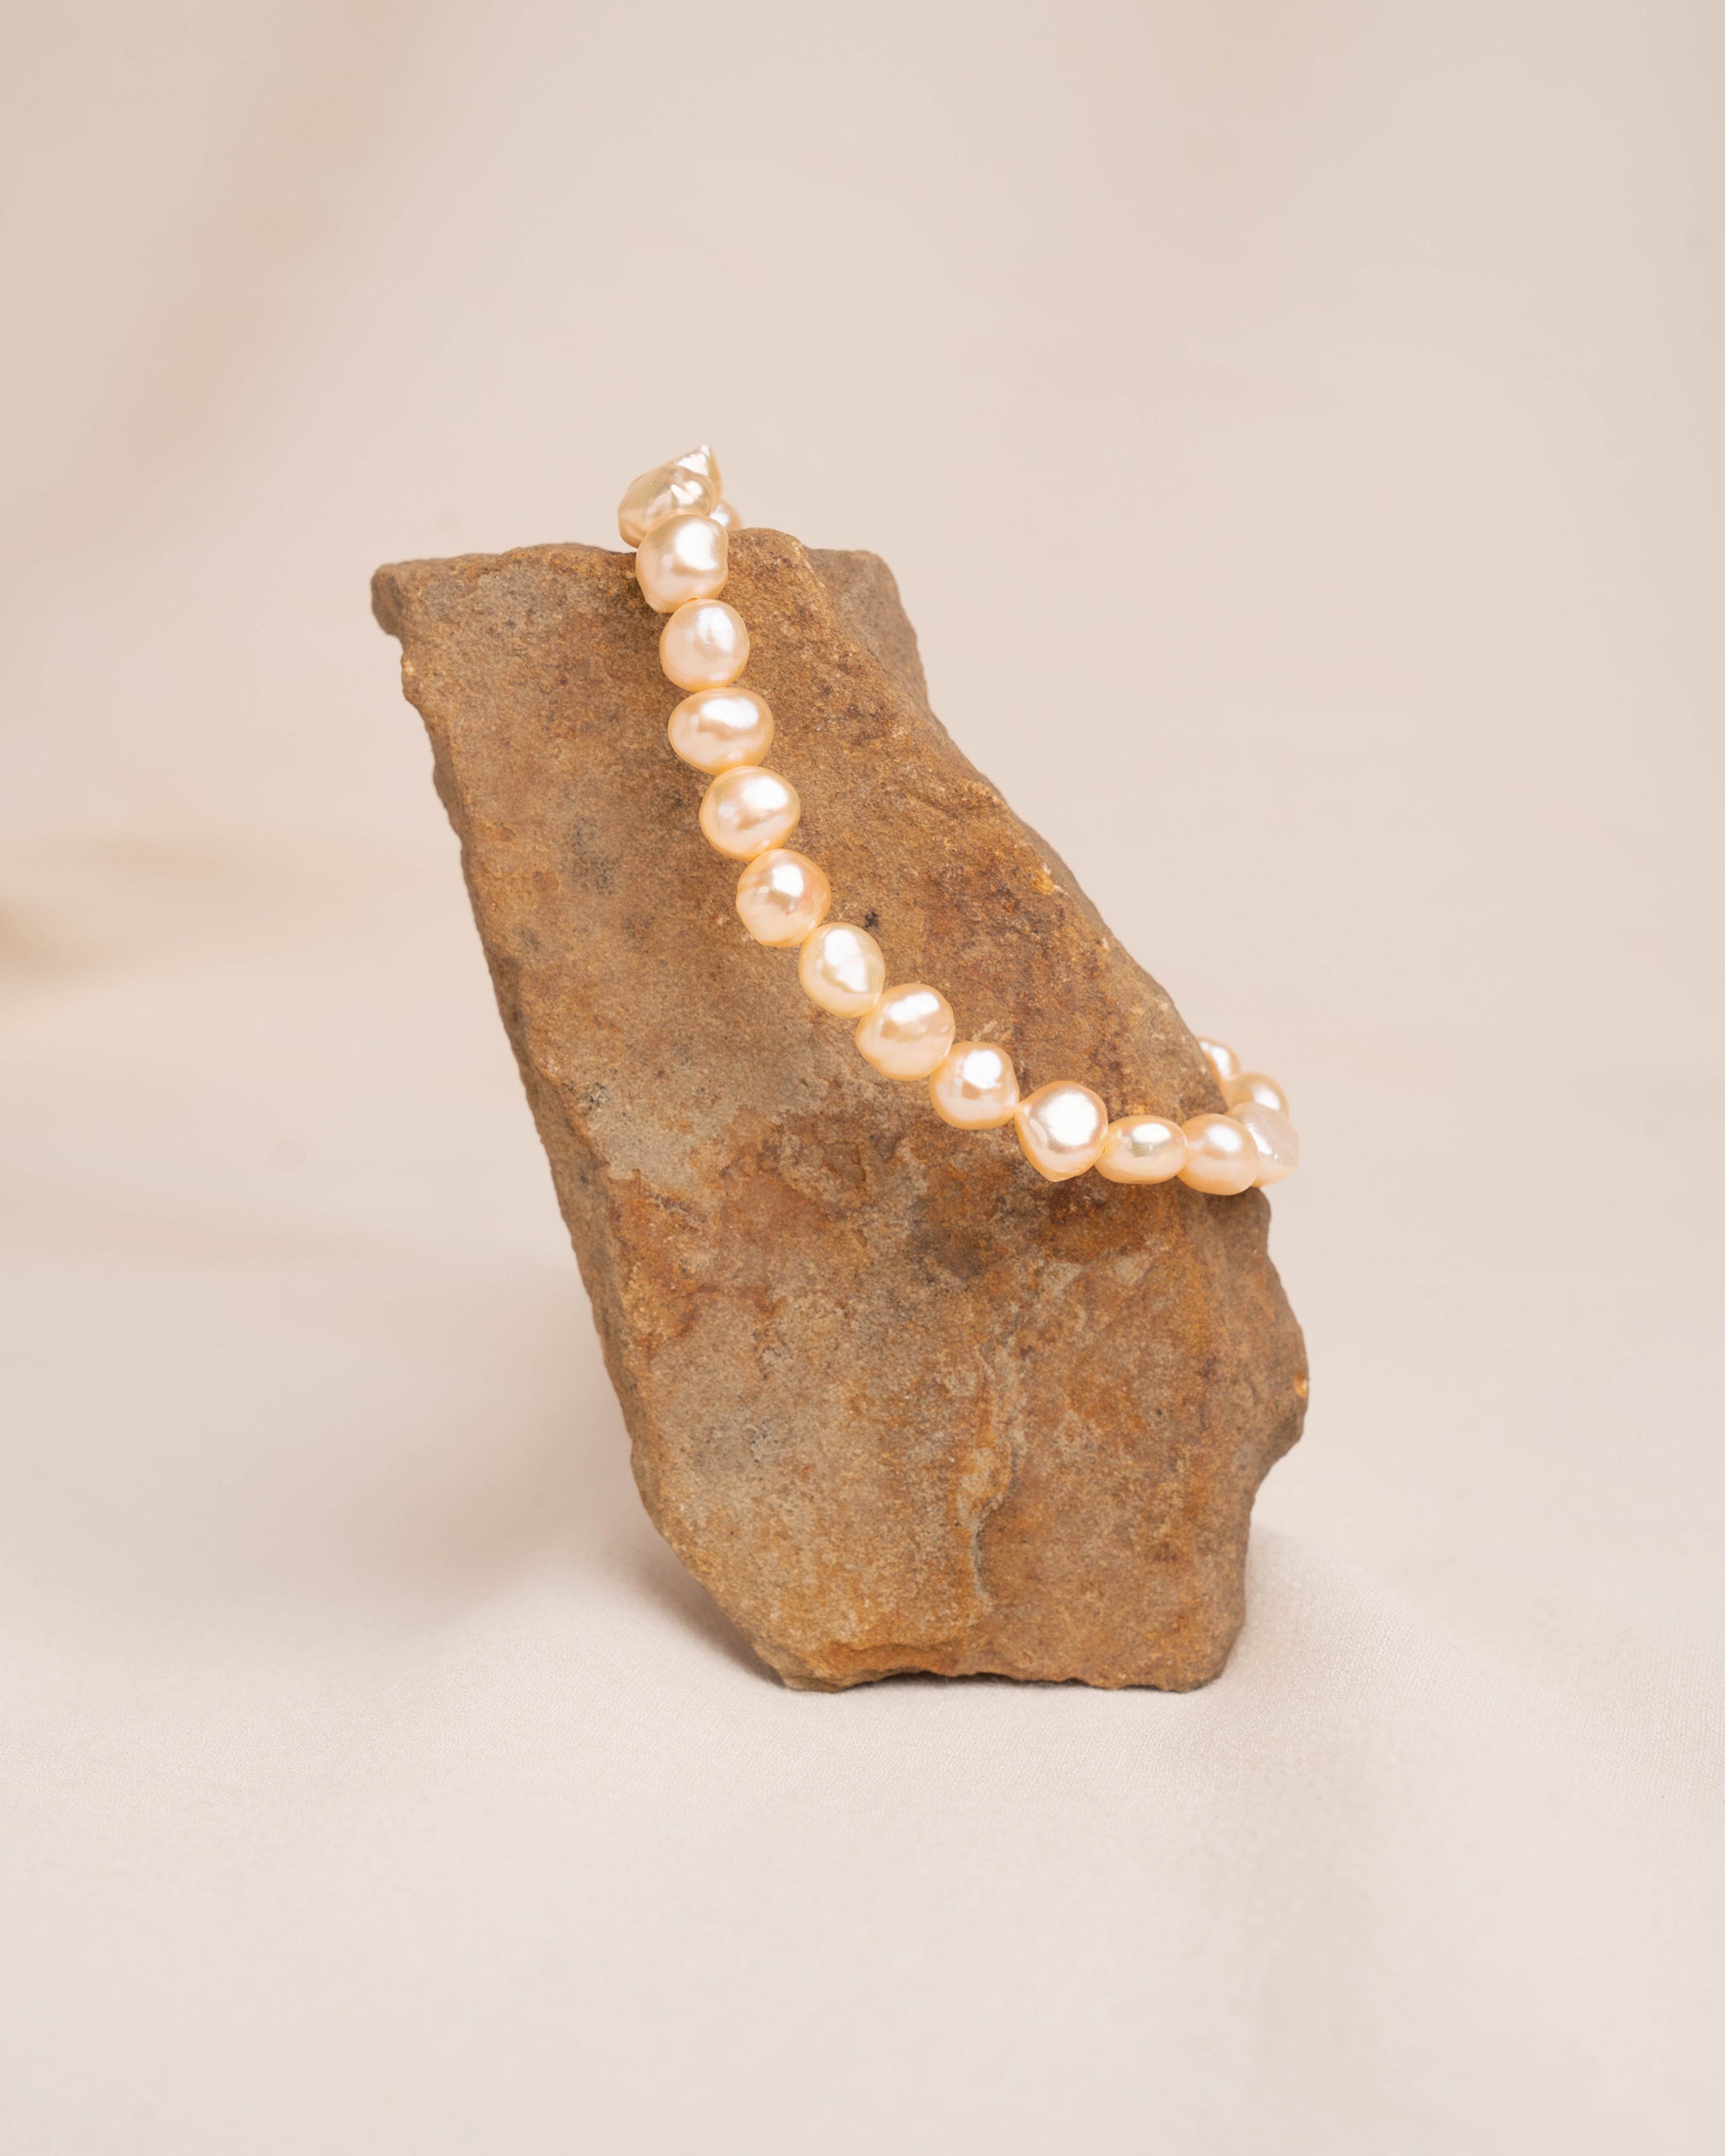 Set of Elastic Bracelets with Baroque Freshwater Pearls in Natural Tones